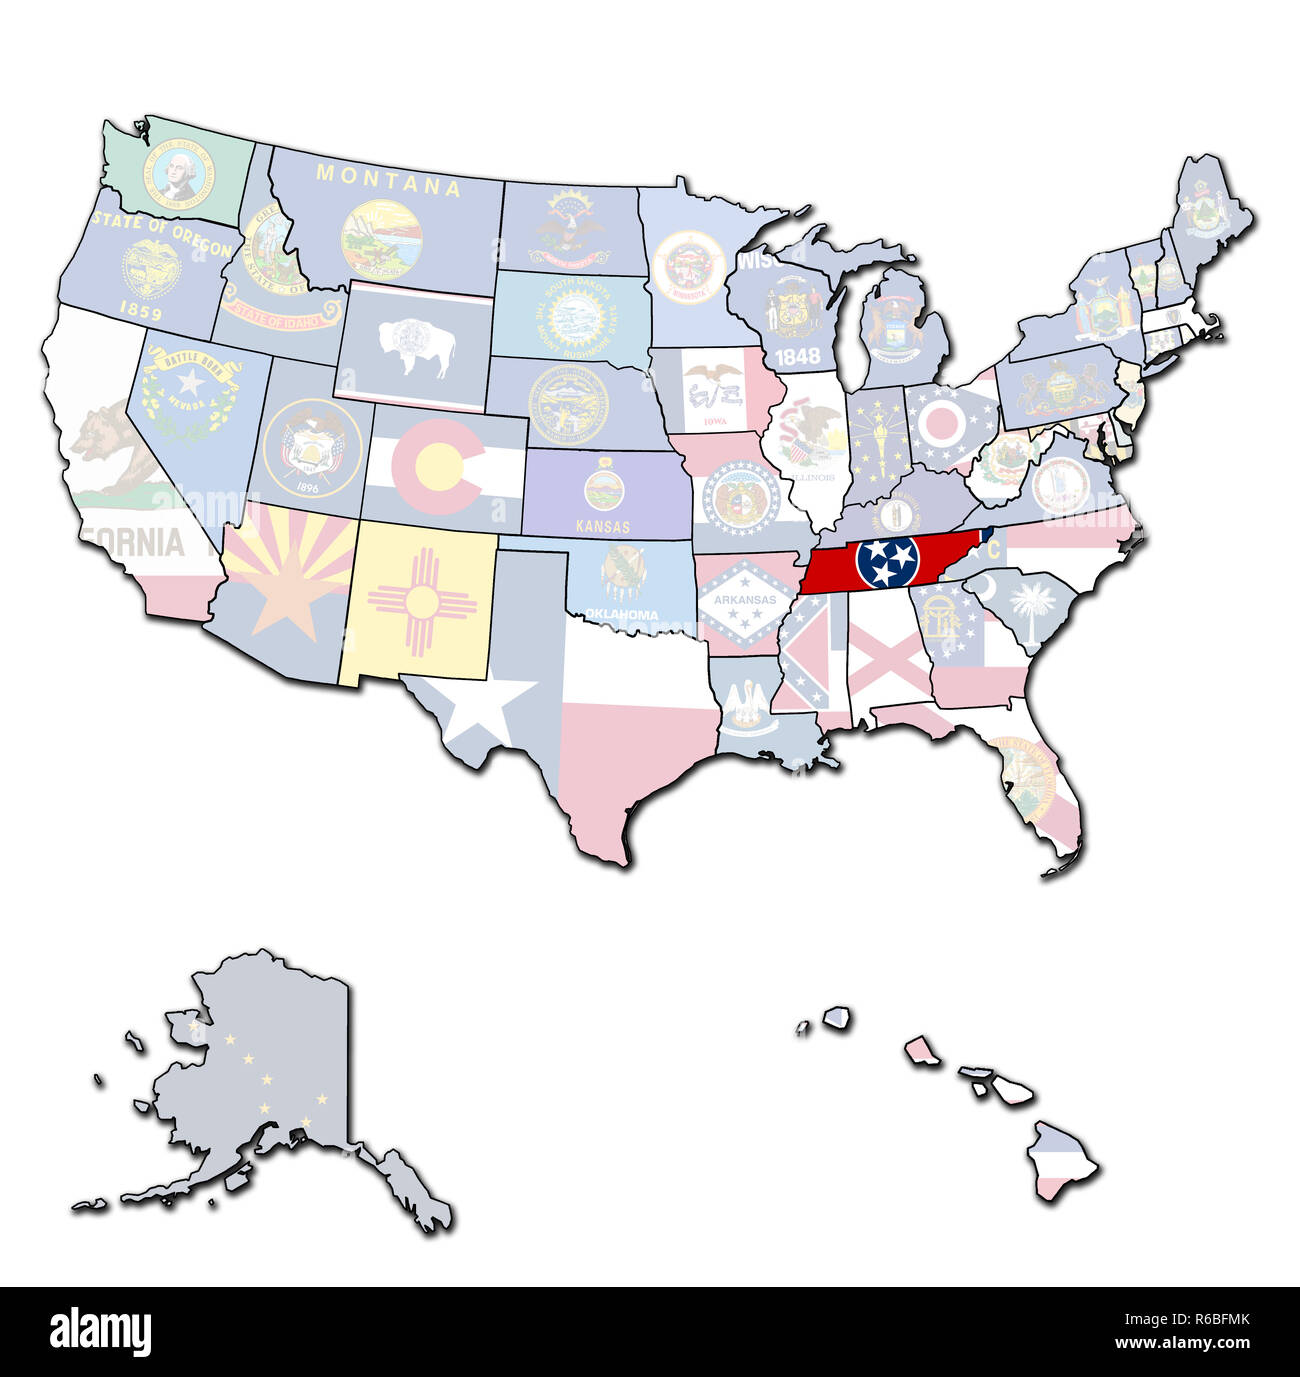 tennessee on map of usa Stock Photo